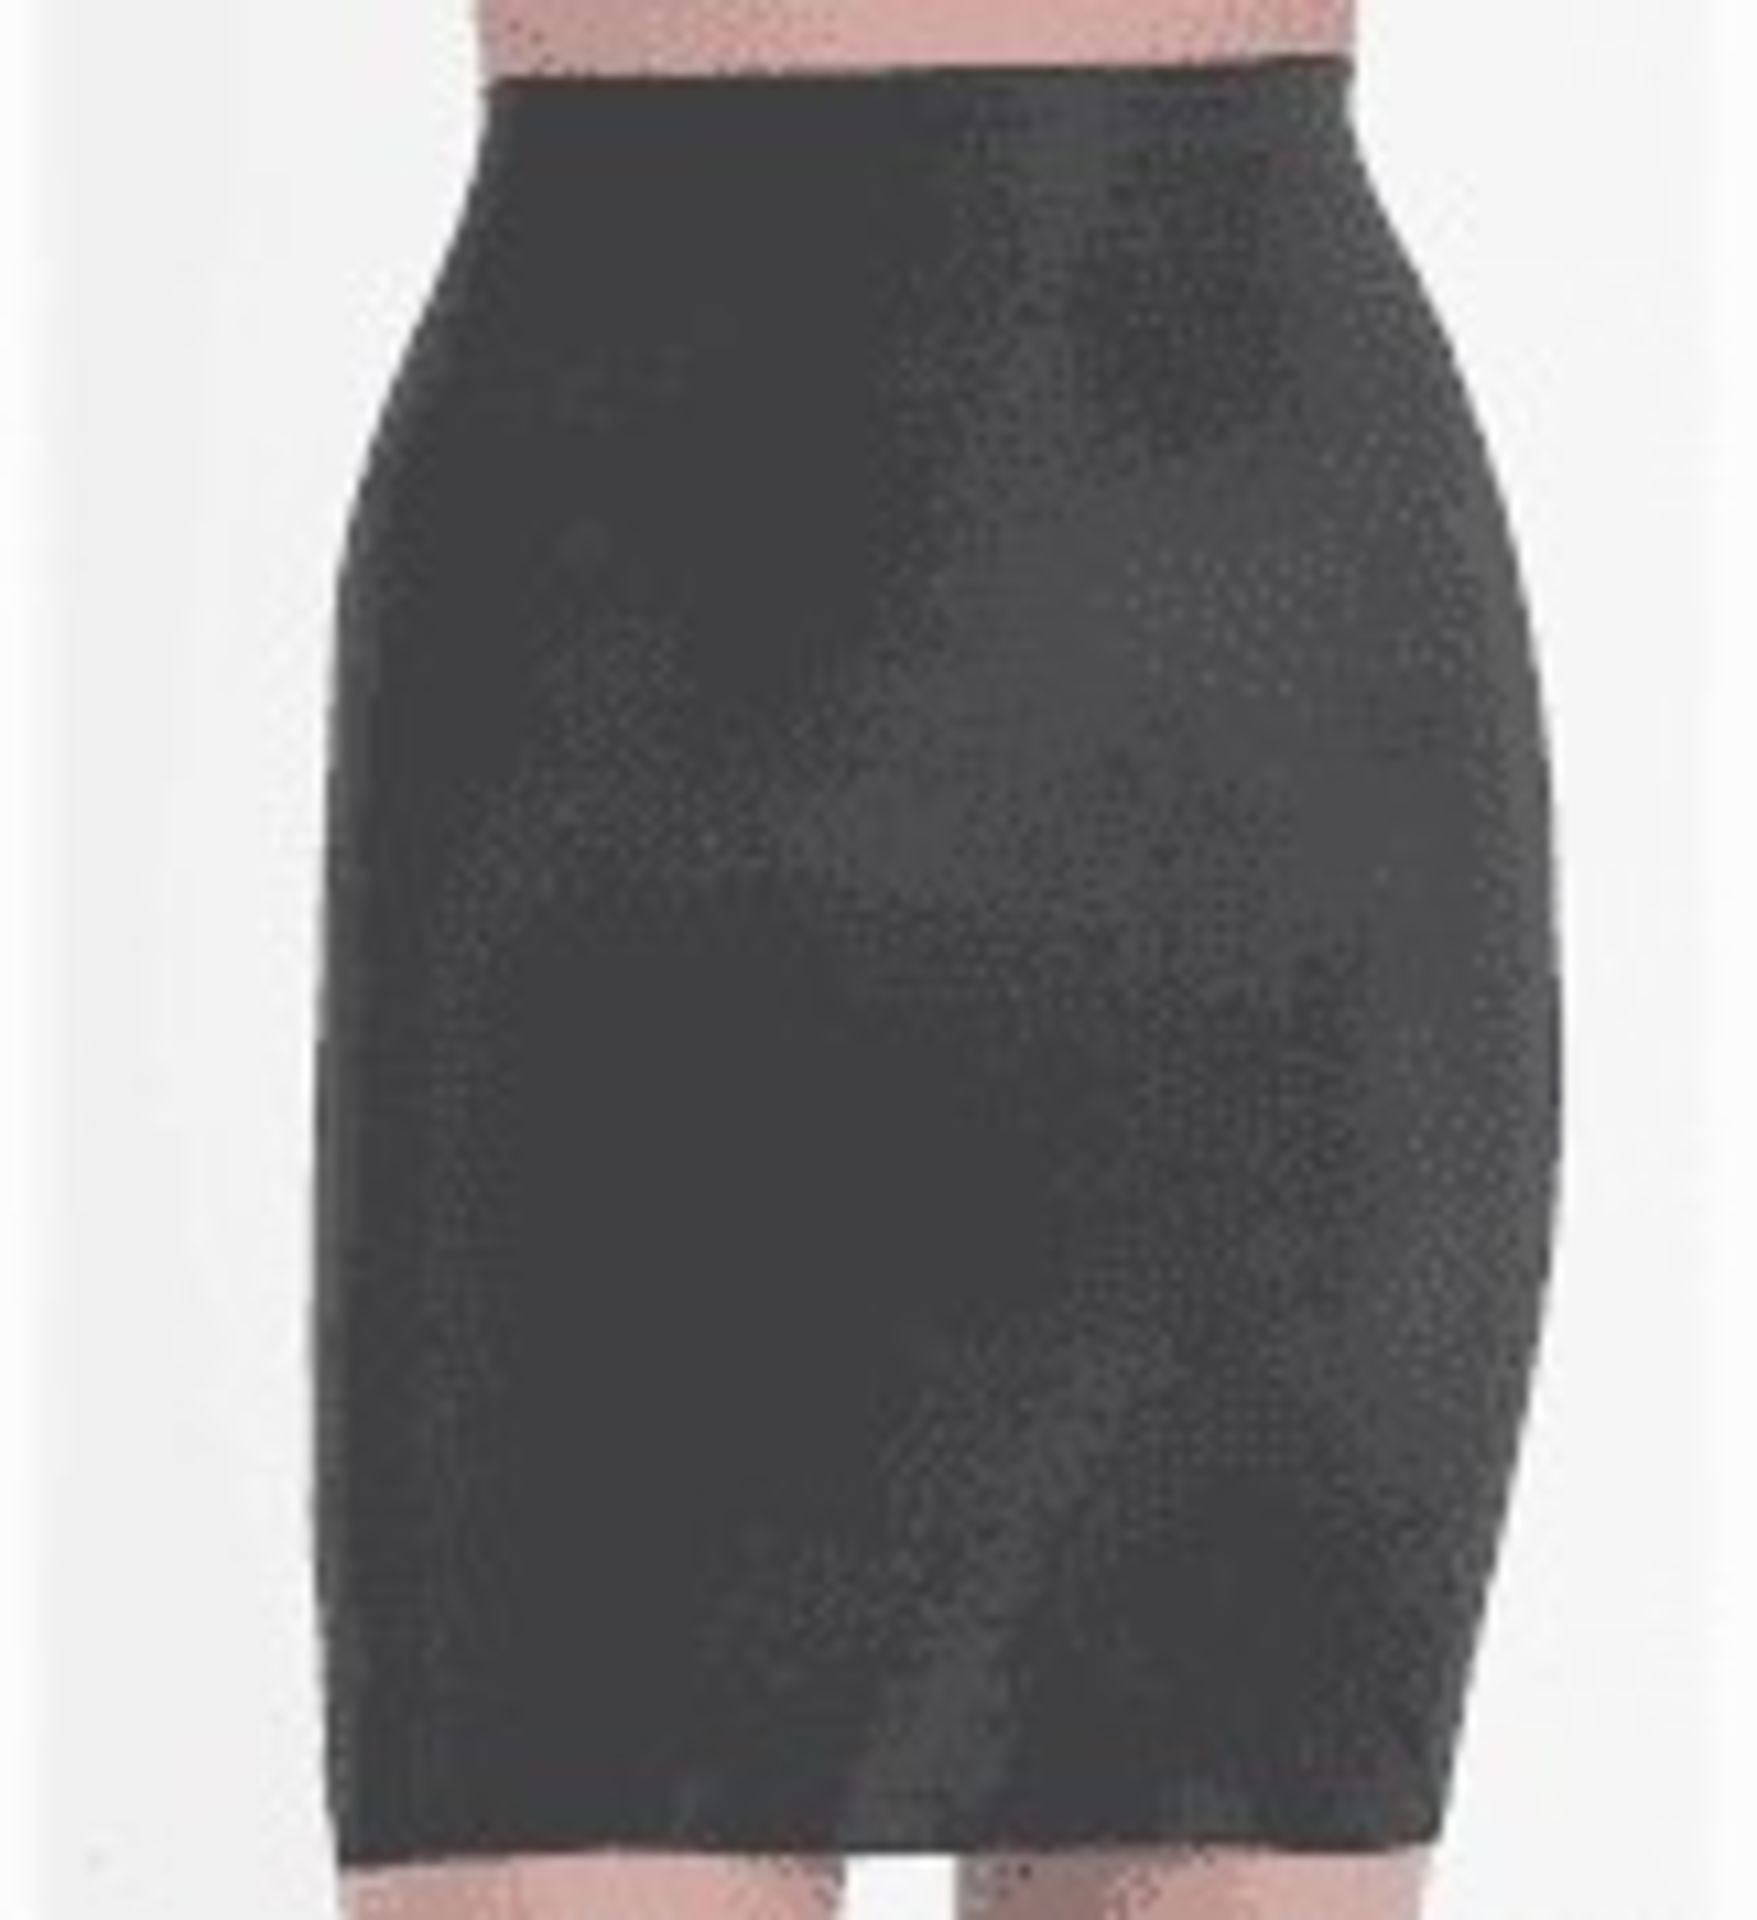 1 LOT TO CONTAIN 6 SPANX SKIRTS IN BOLD BLACK / SIZE 6 / STYLE 1899 / RRP £528.00 (PUBLIC VIEWING